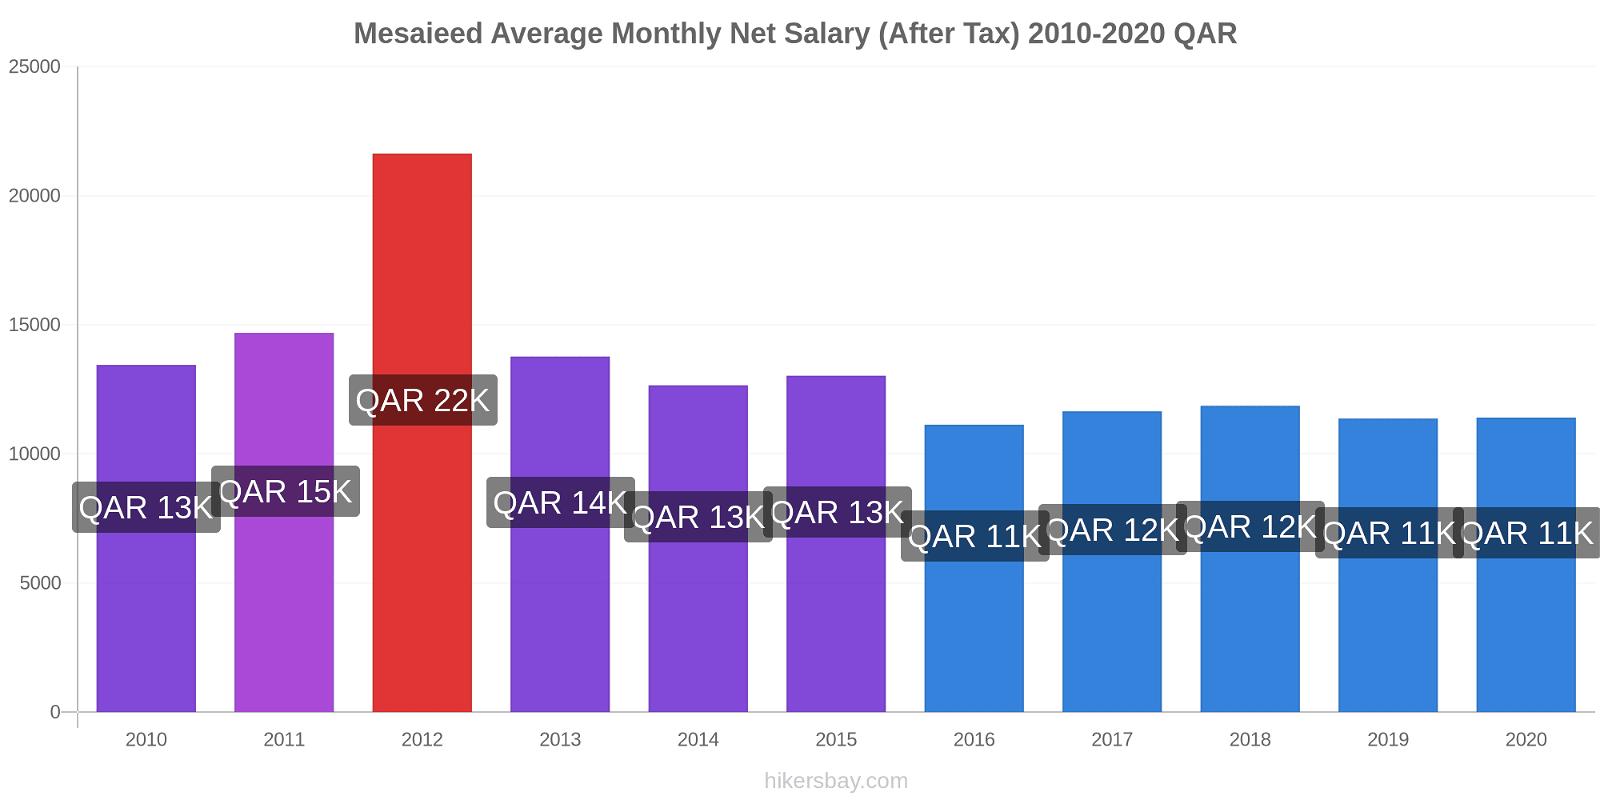 Mesaieed price changes Average Monthly Net Salary (After Tax) hikersbay.com